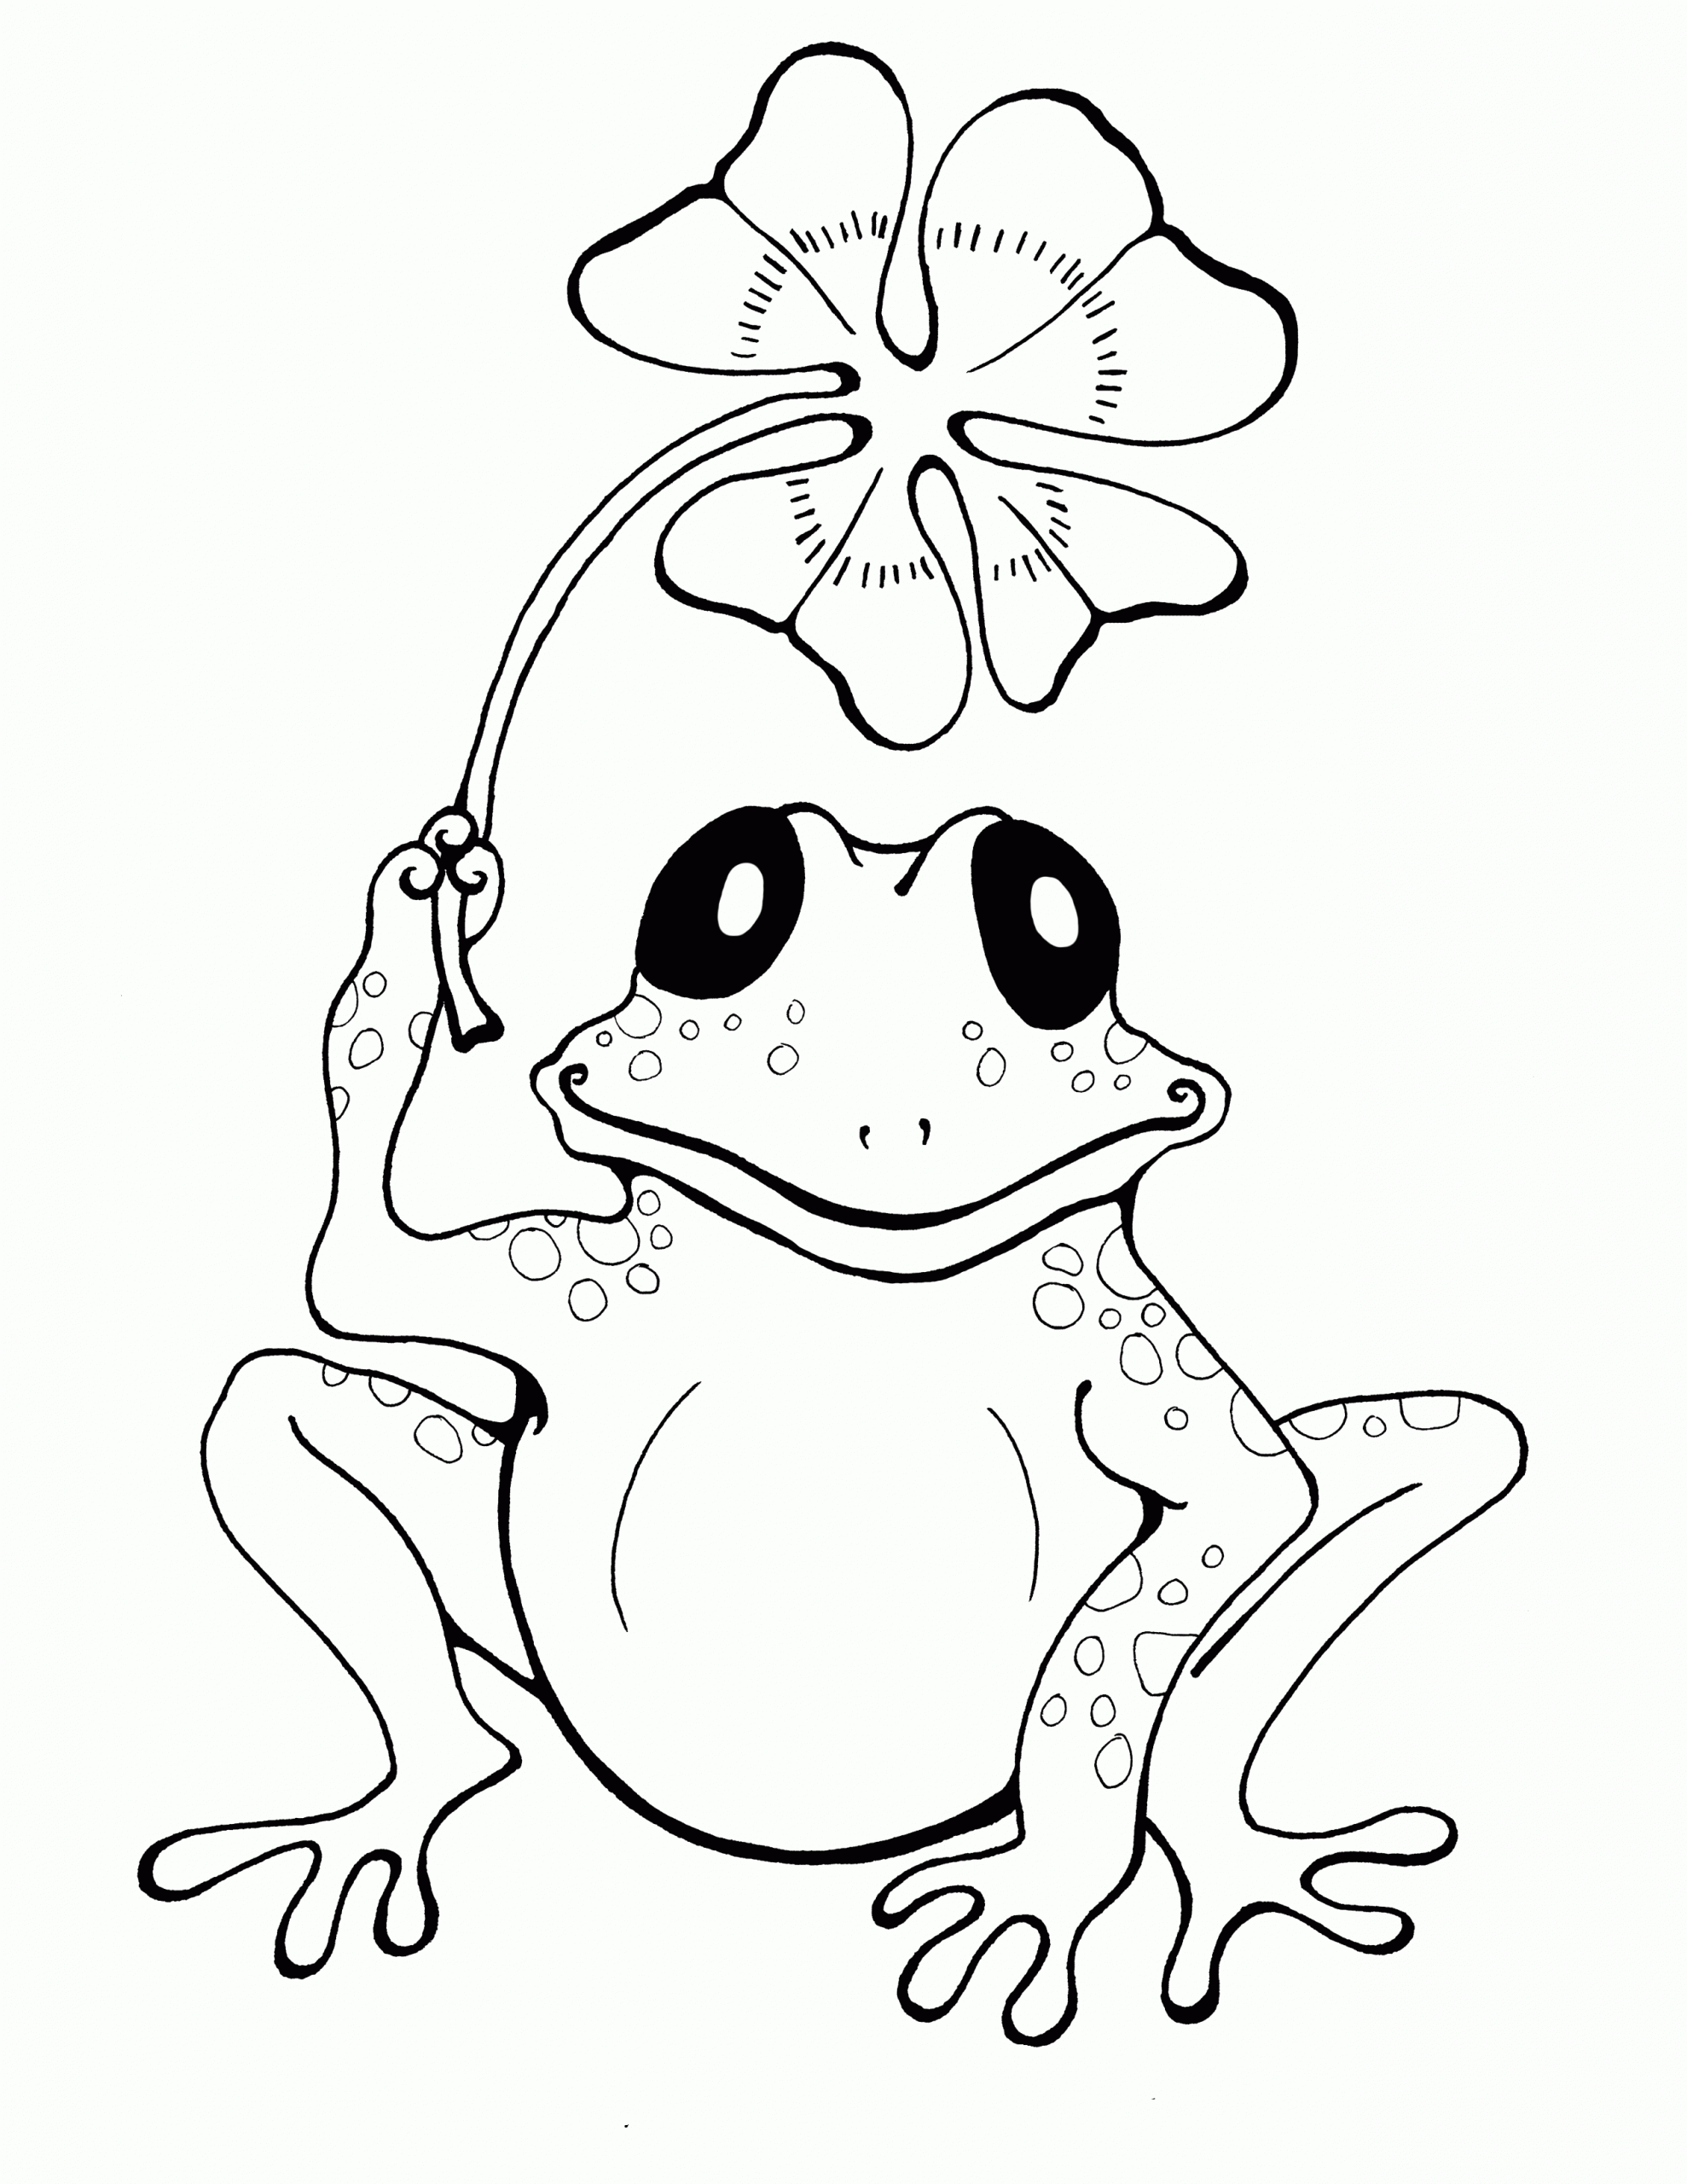 Toad 3